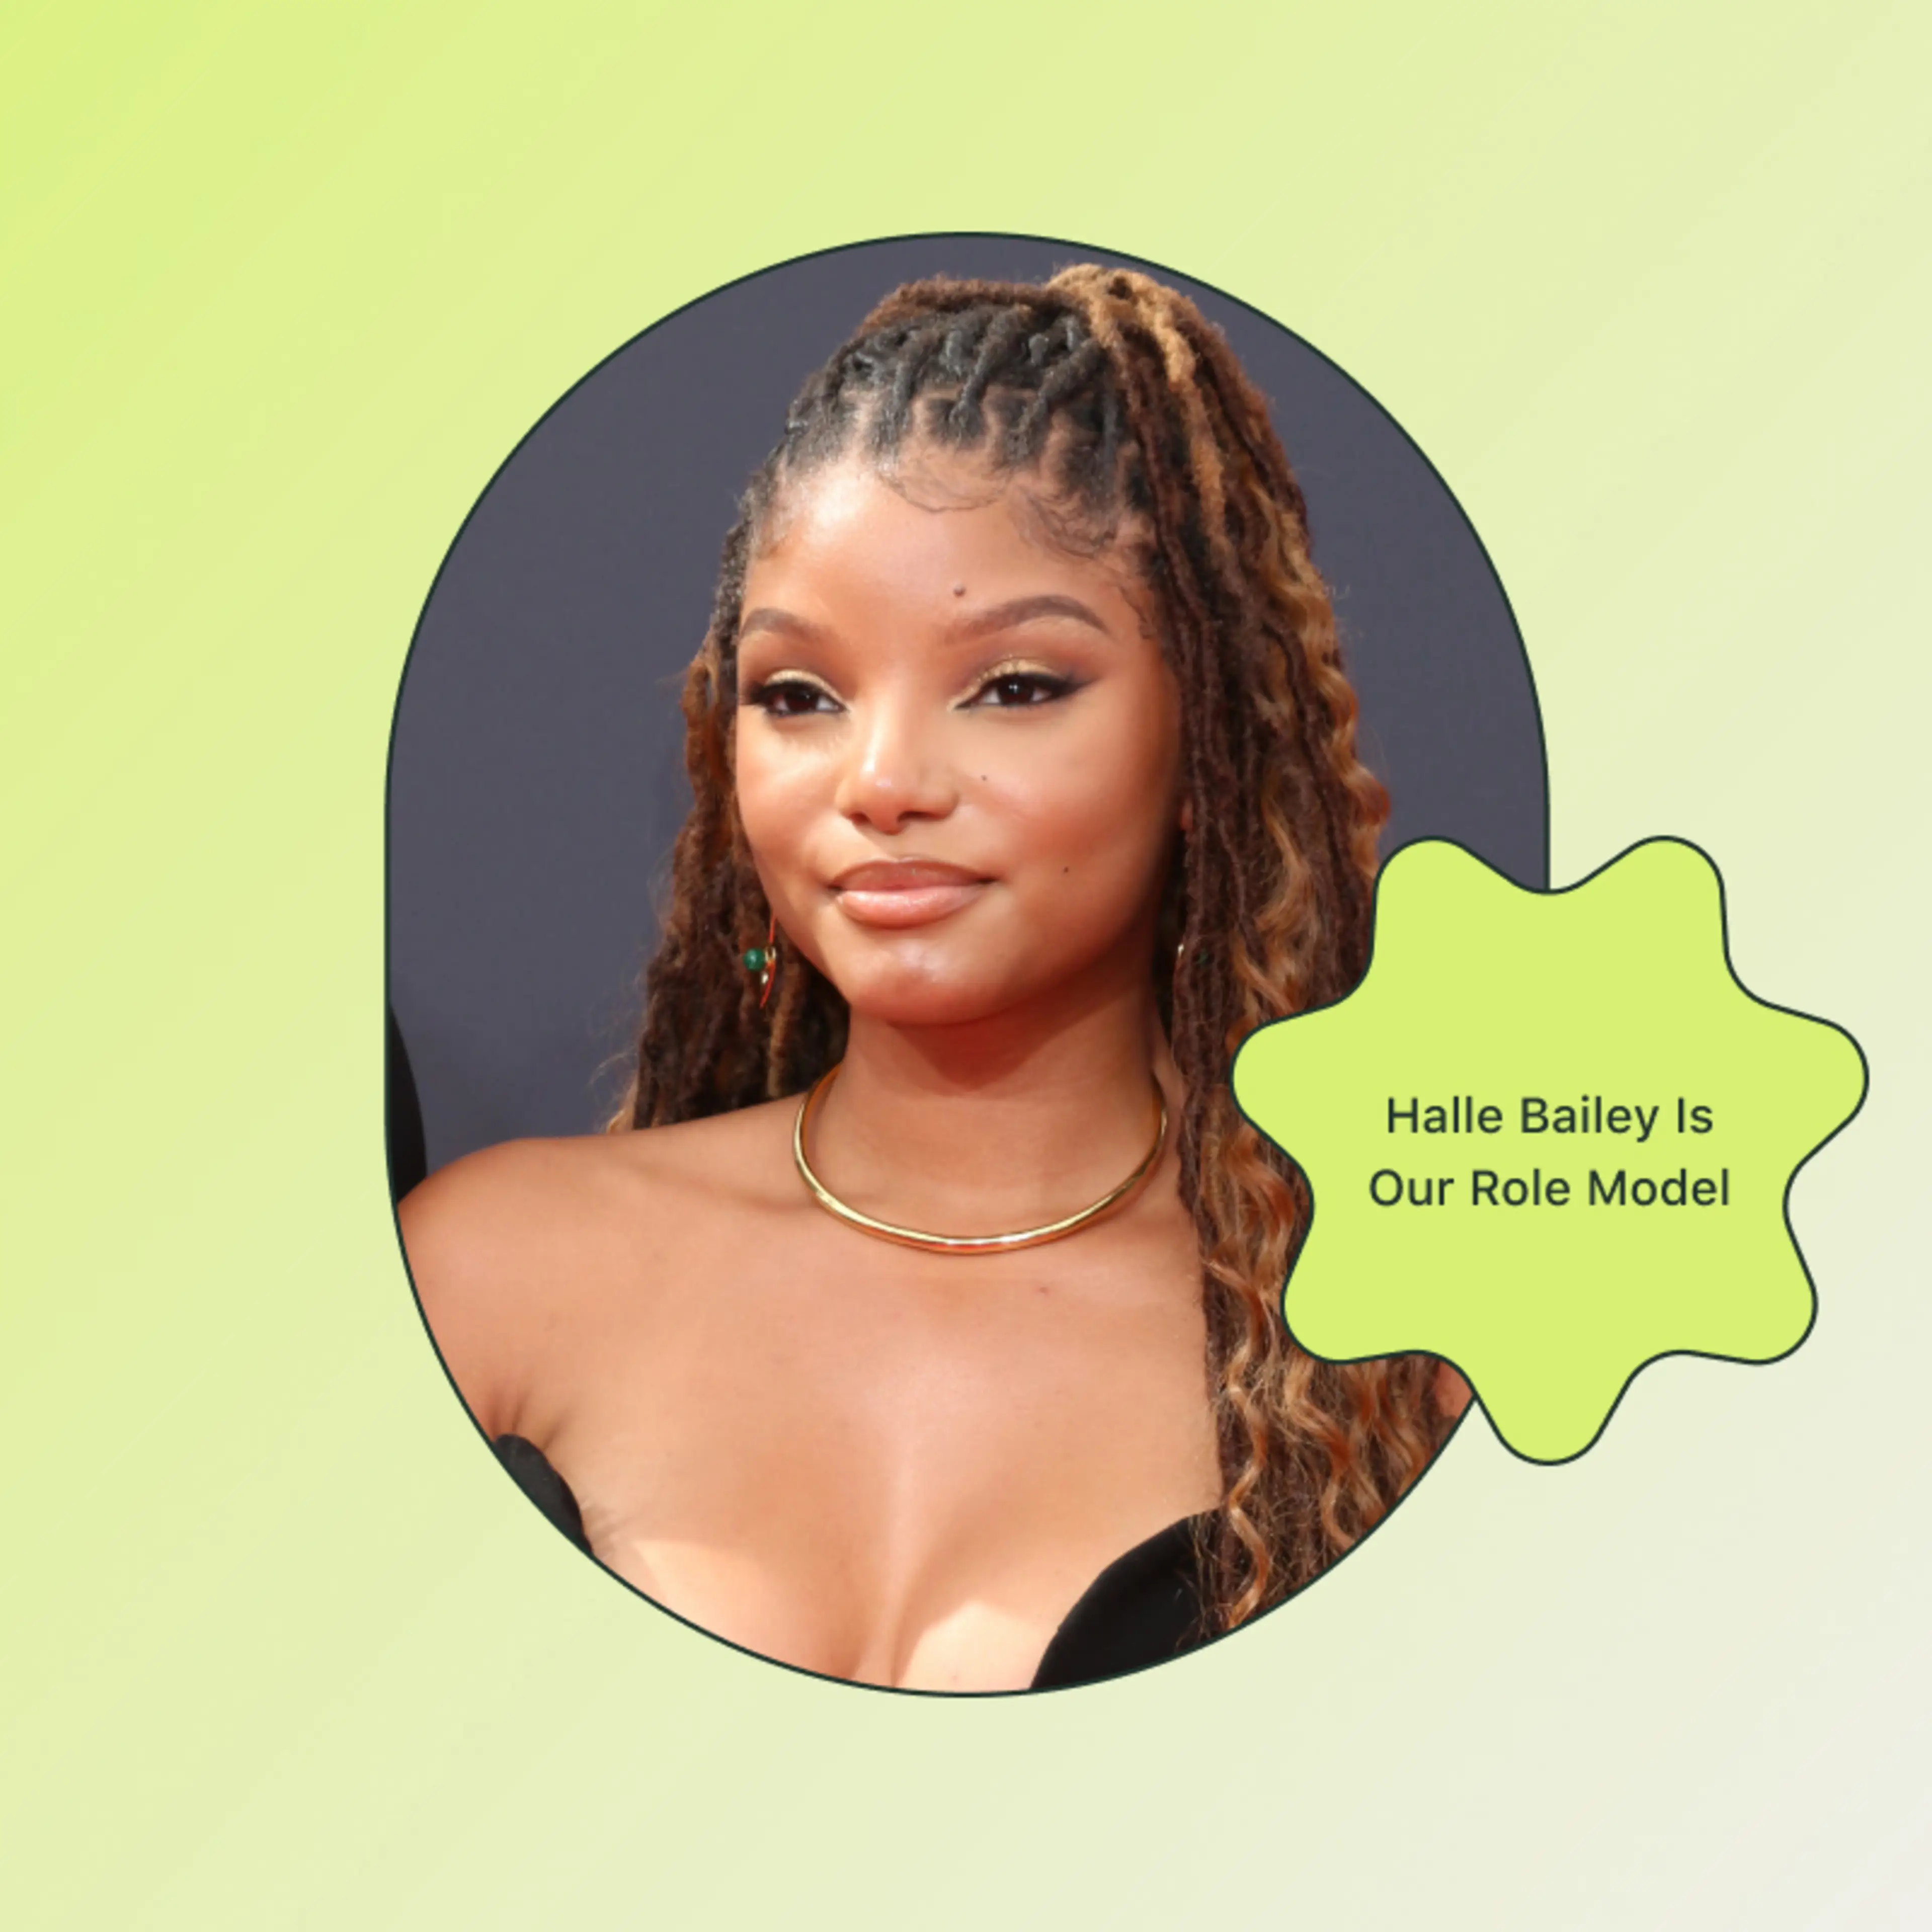 How Halle Bailey’s (Lack of a) Pregnancy Announcement Has Empowered Us